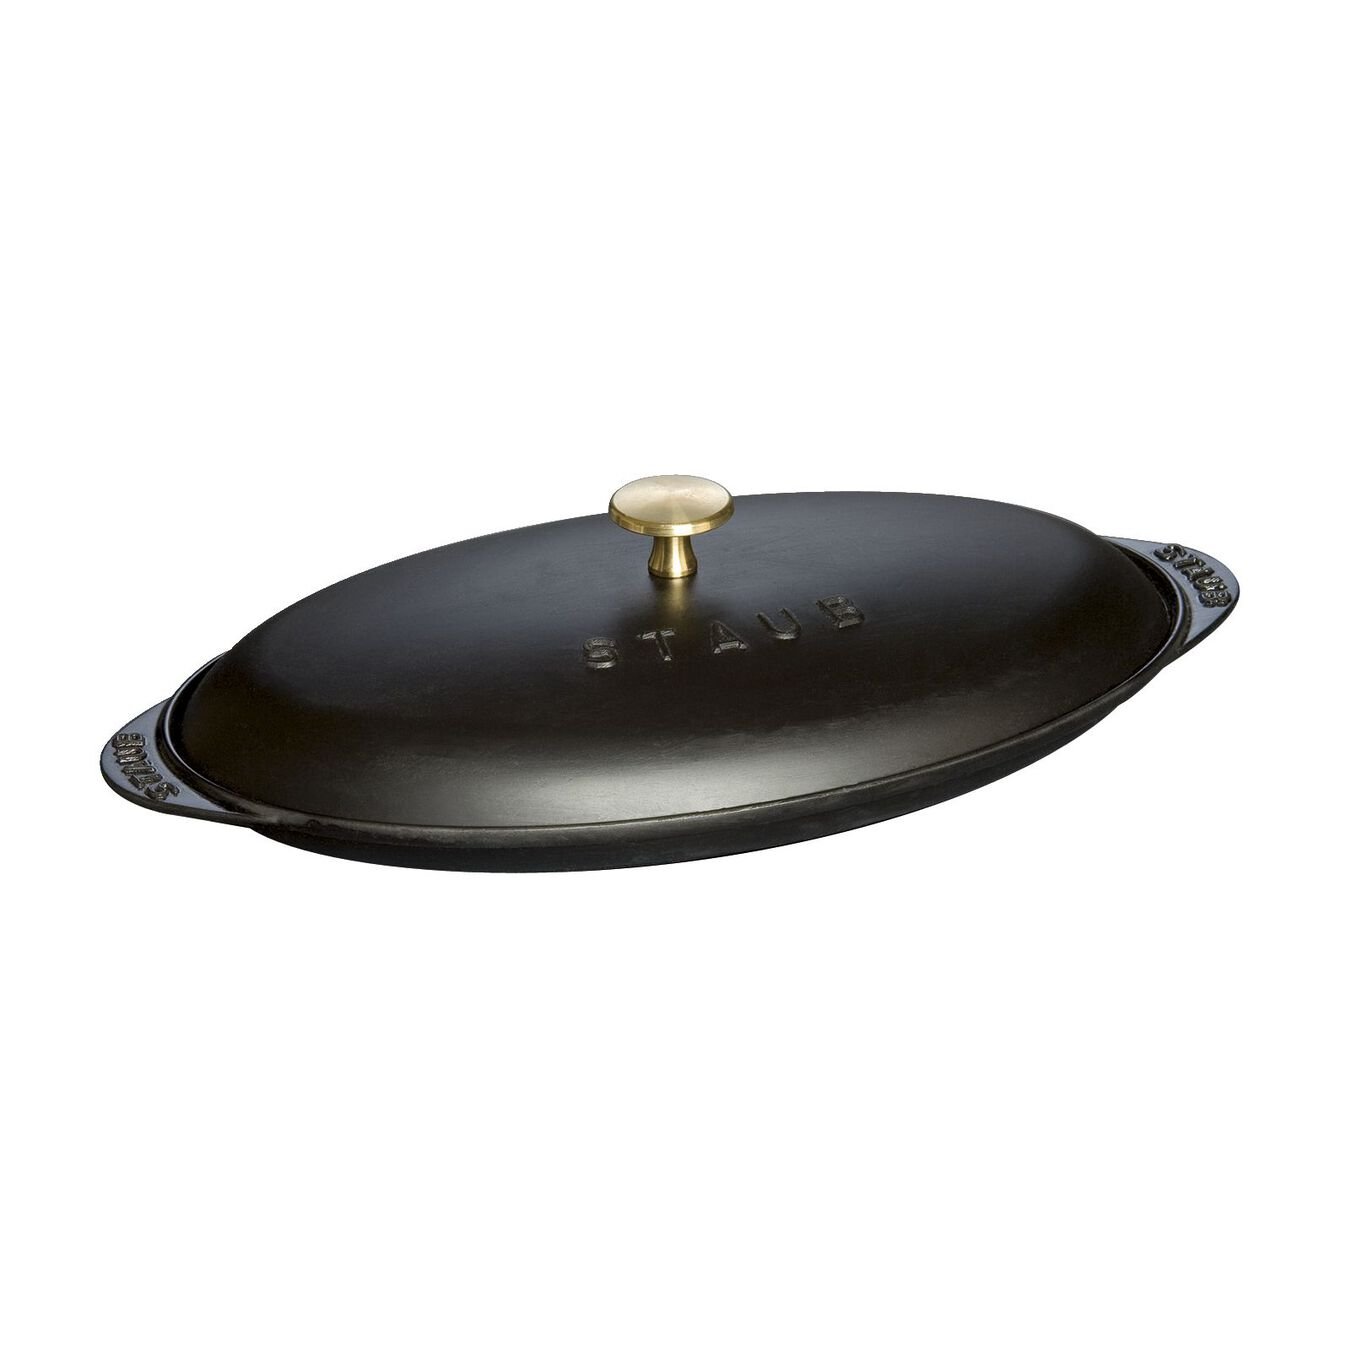  cast iron oval Oven dish with lid, black - Visual Imperfections,,large 3